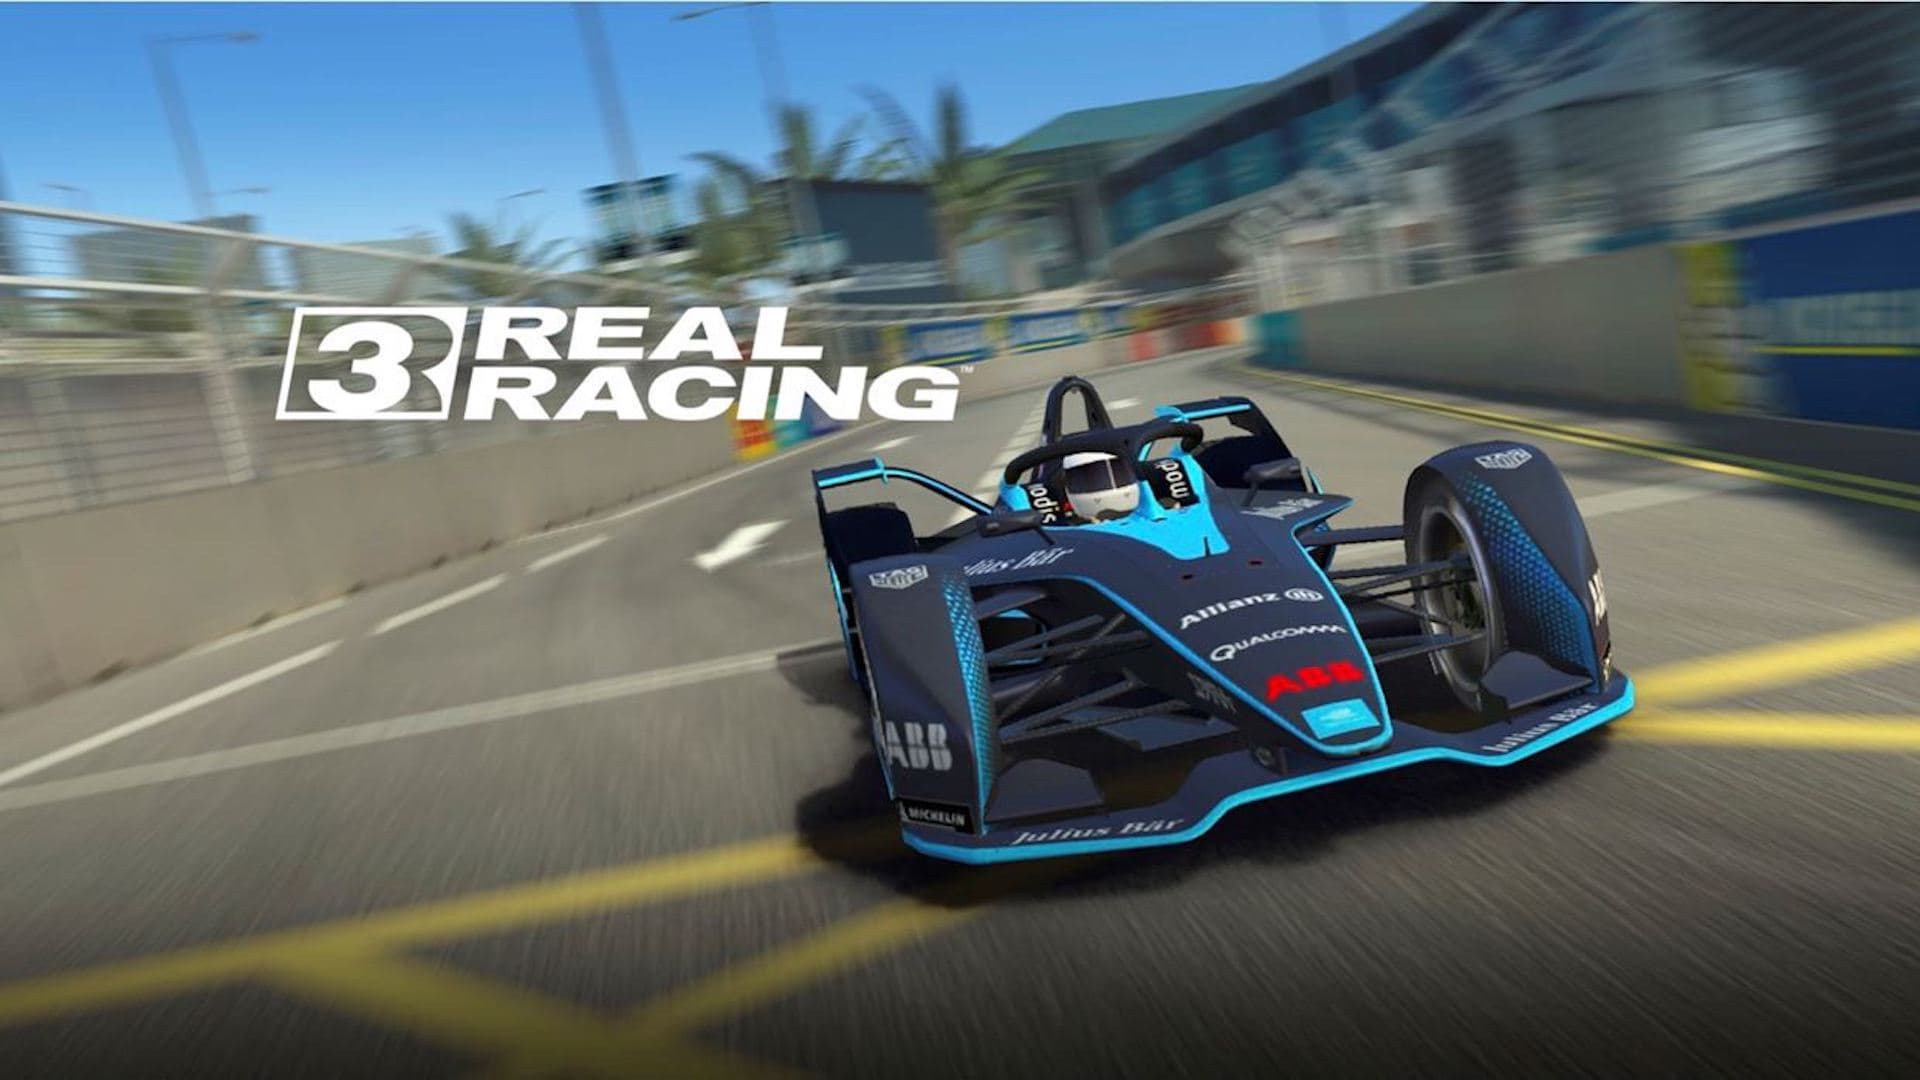 Formula E’s Gen2 Racer Will Make Its Gaming Debut on Real Racing 3